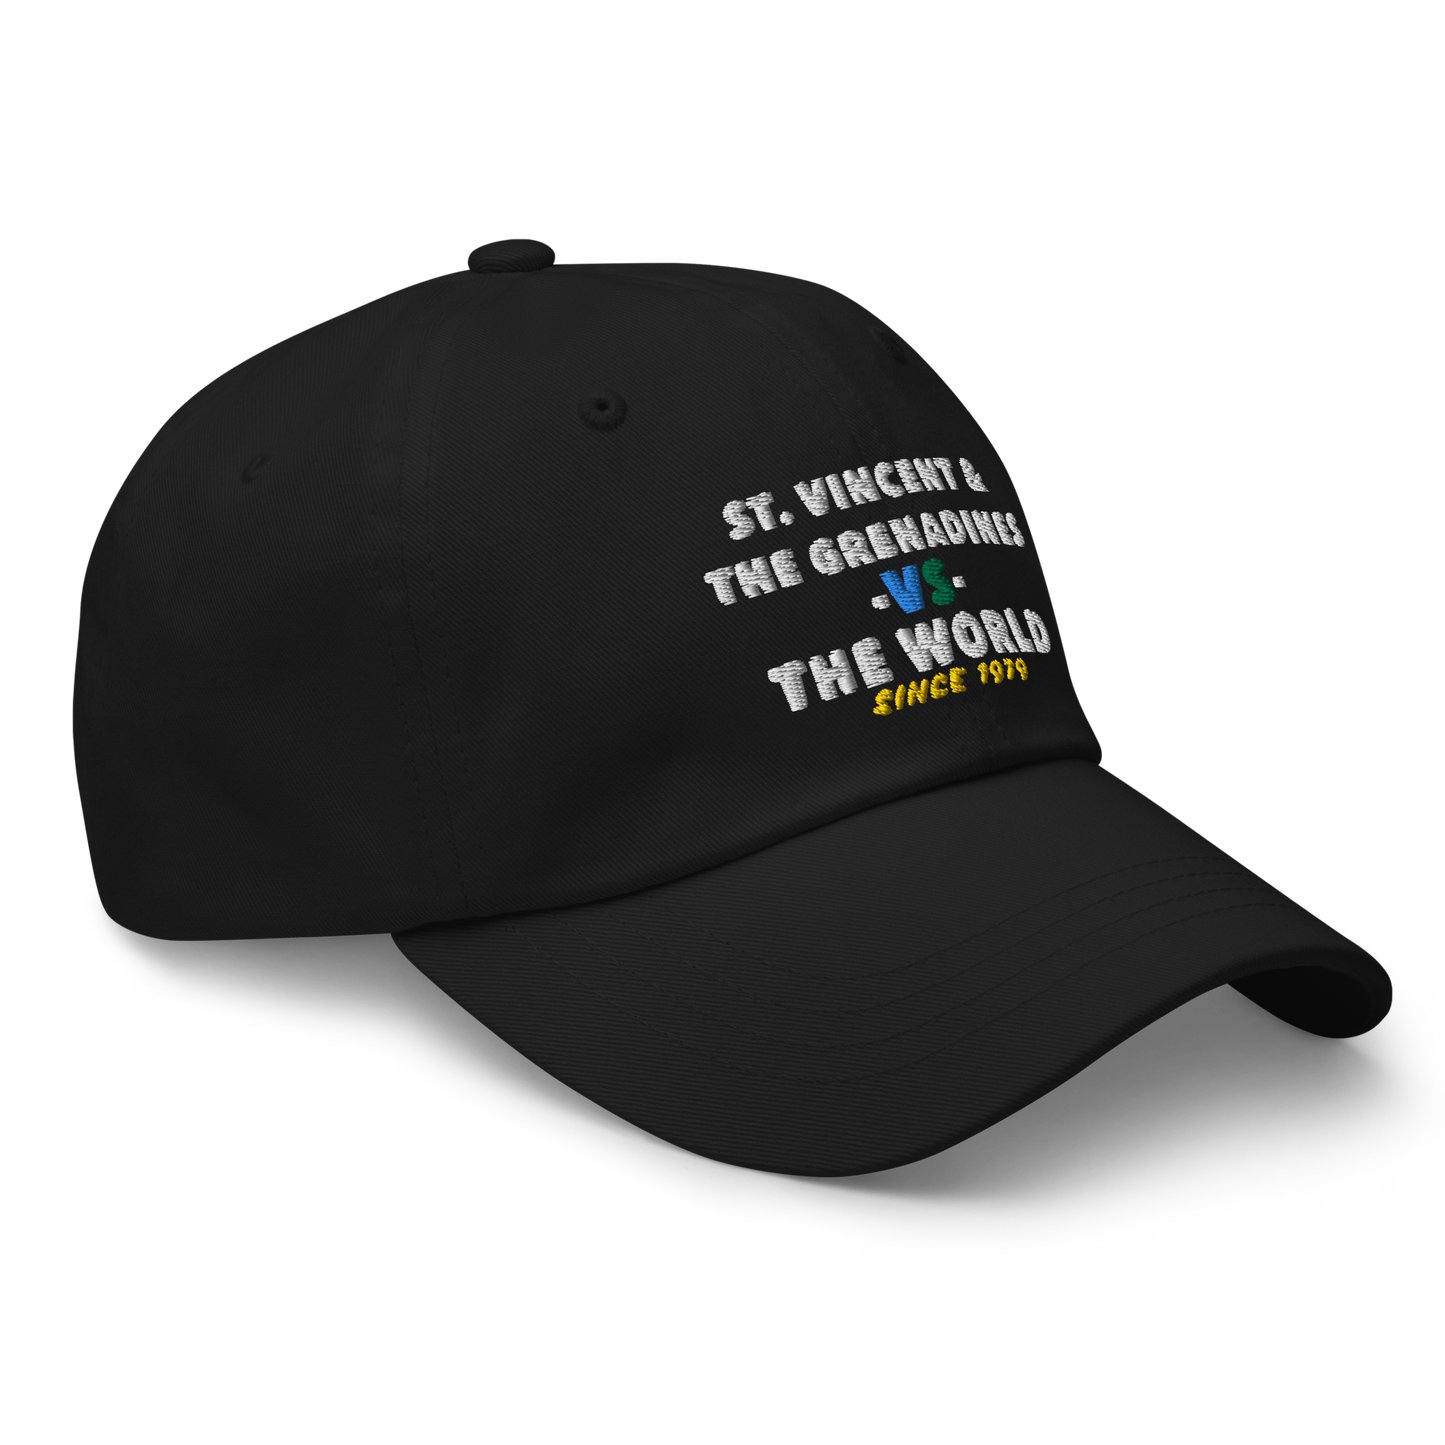 St. Vincent & The Grenadines -vs- The World Dad hat